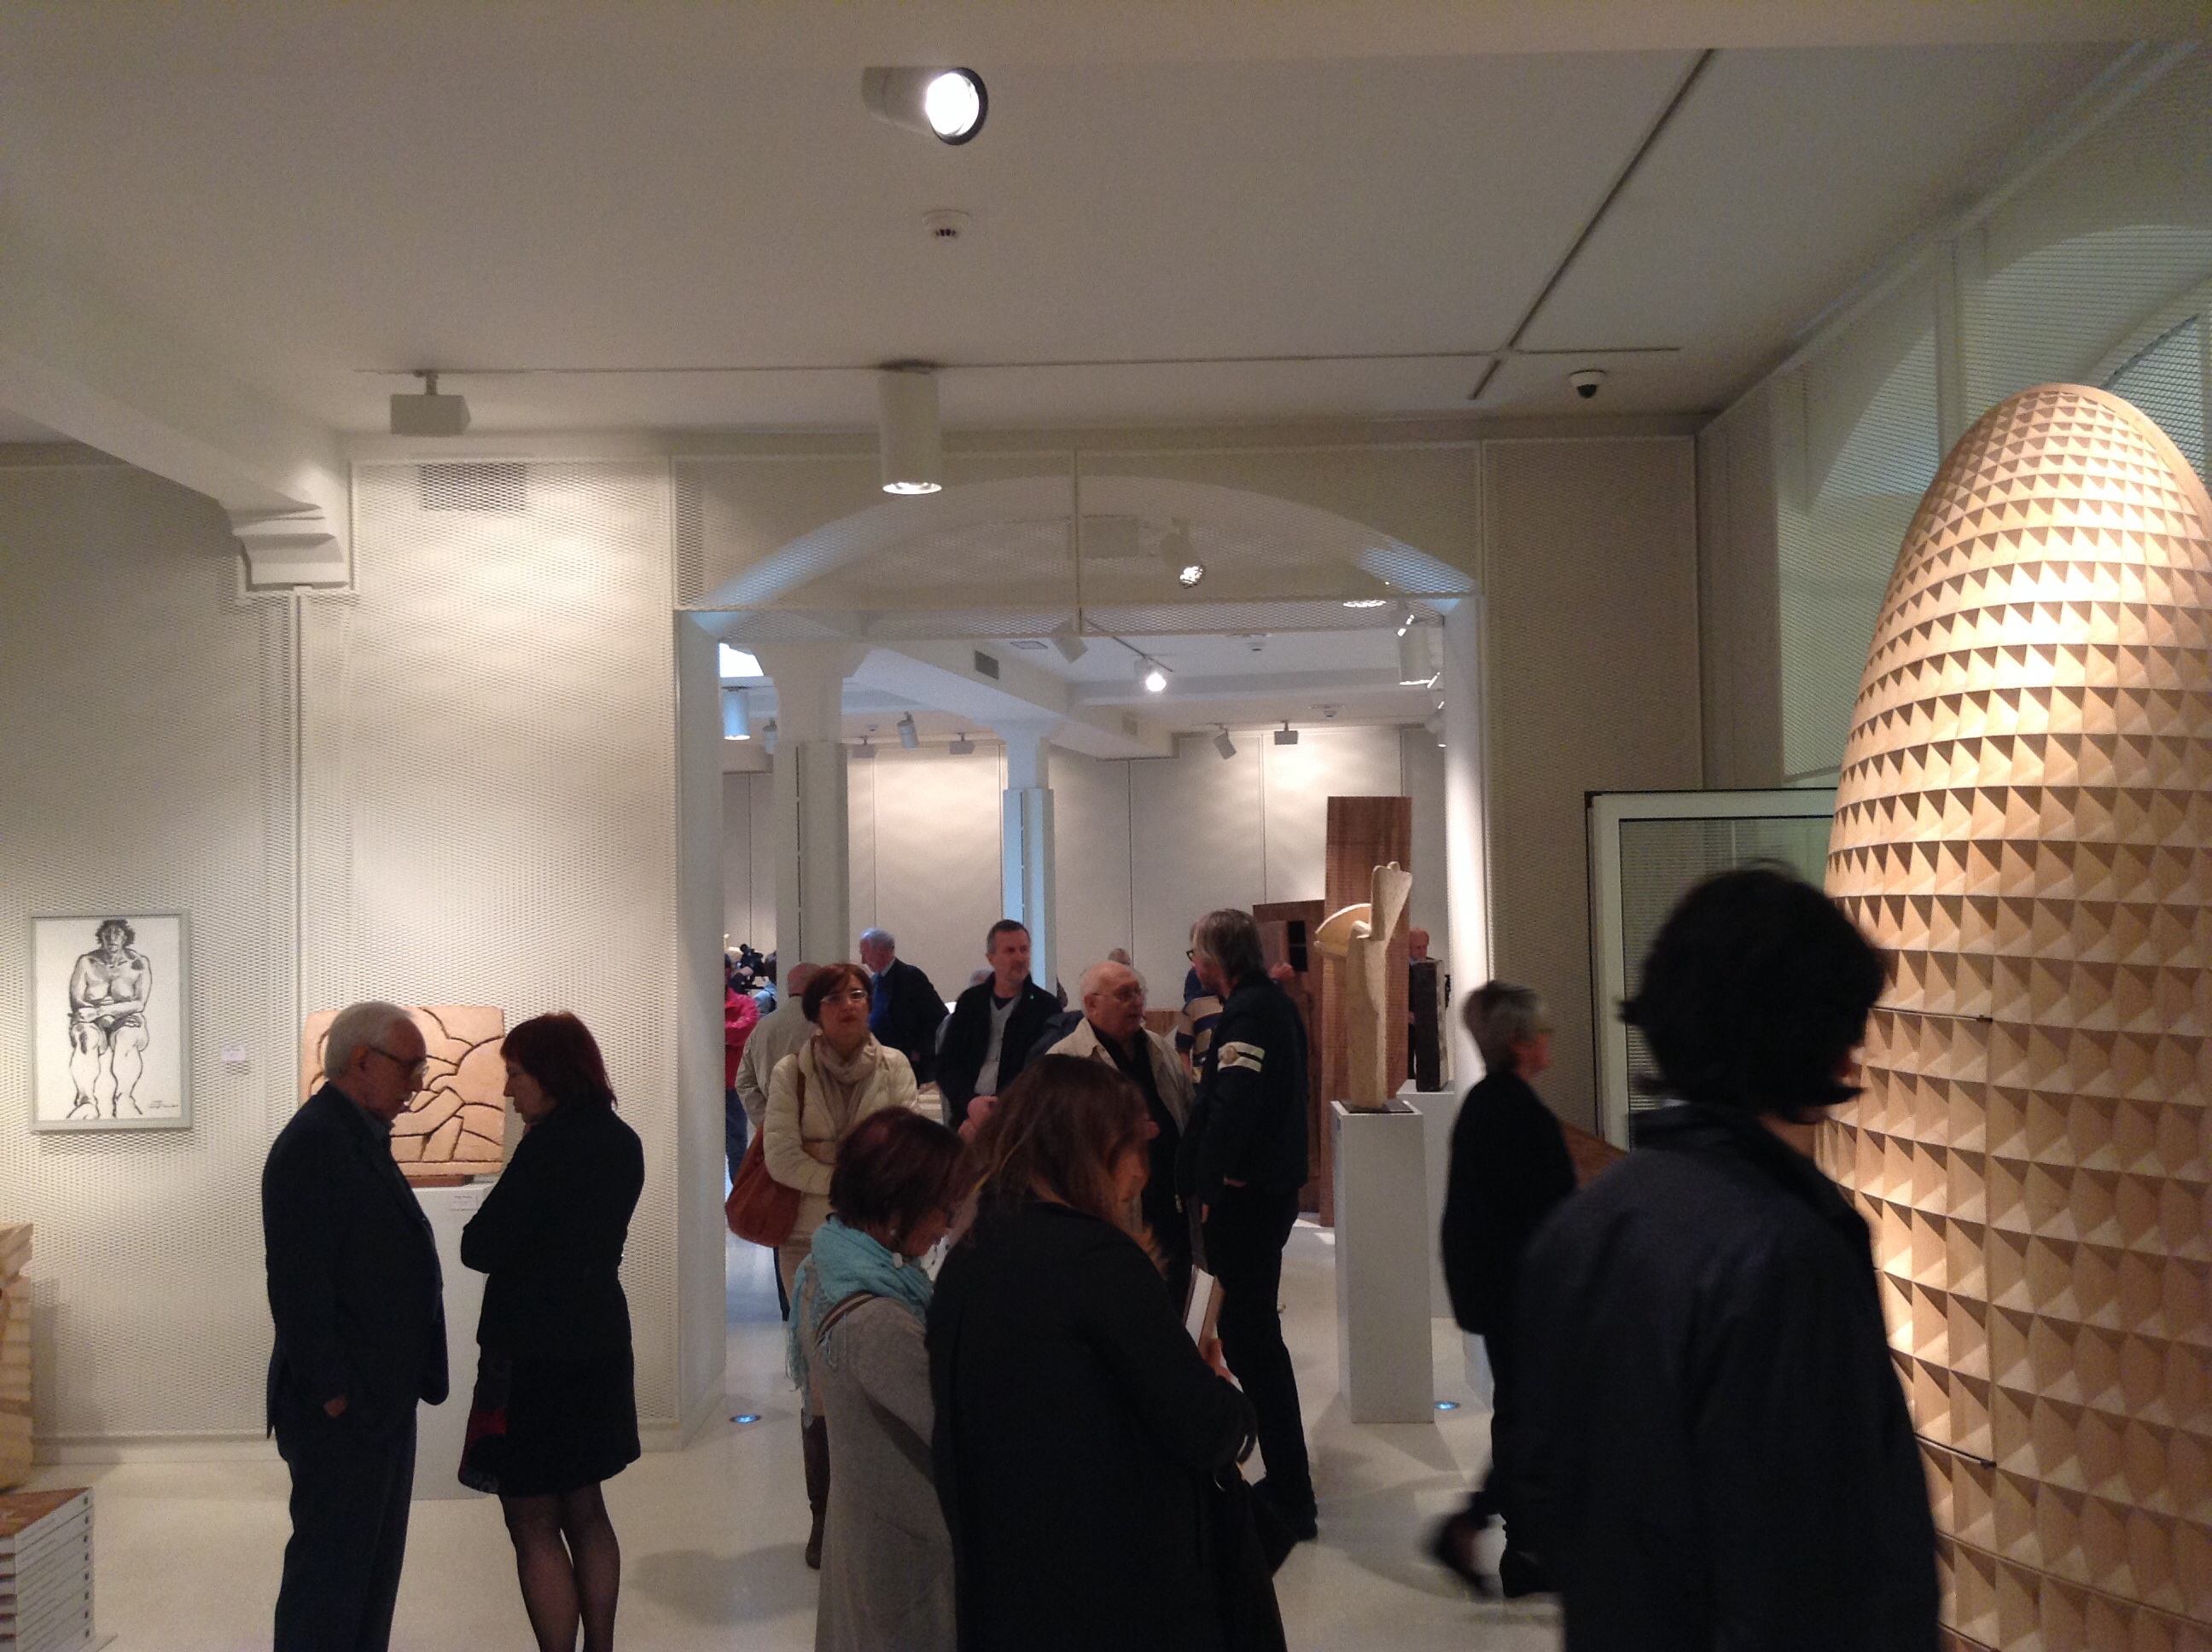 Great turnout at Agnellini Arte Moderna for the exhibition